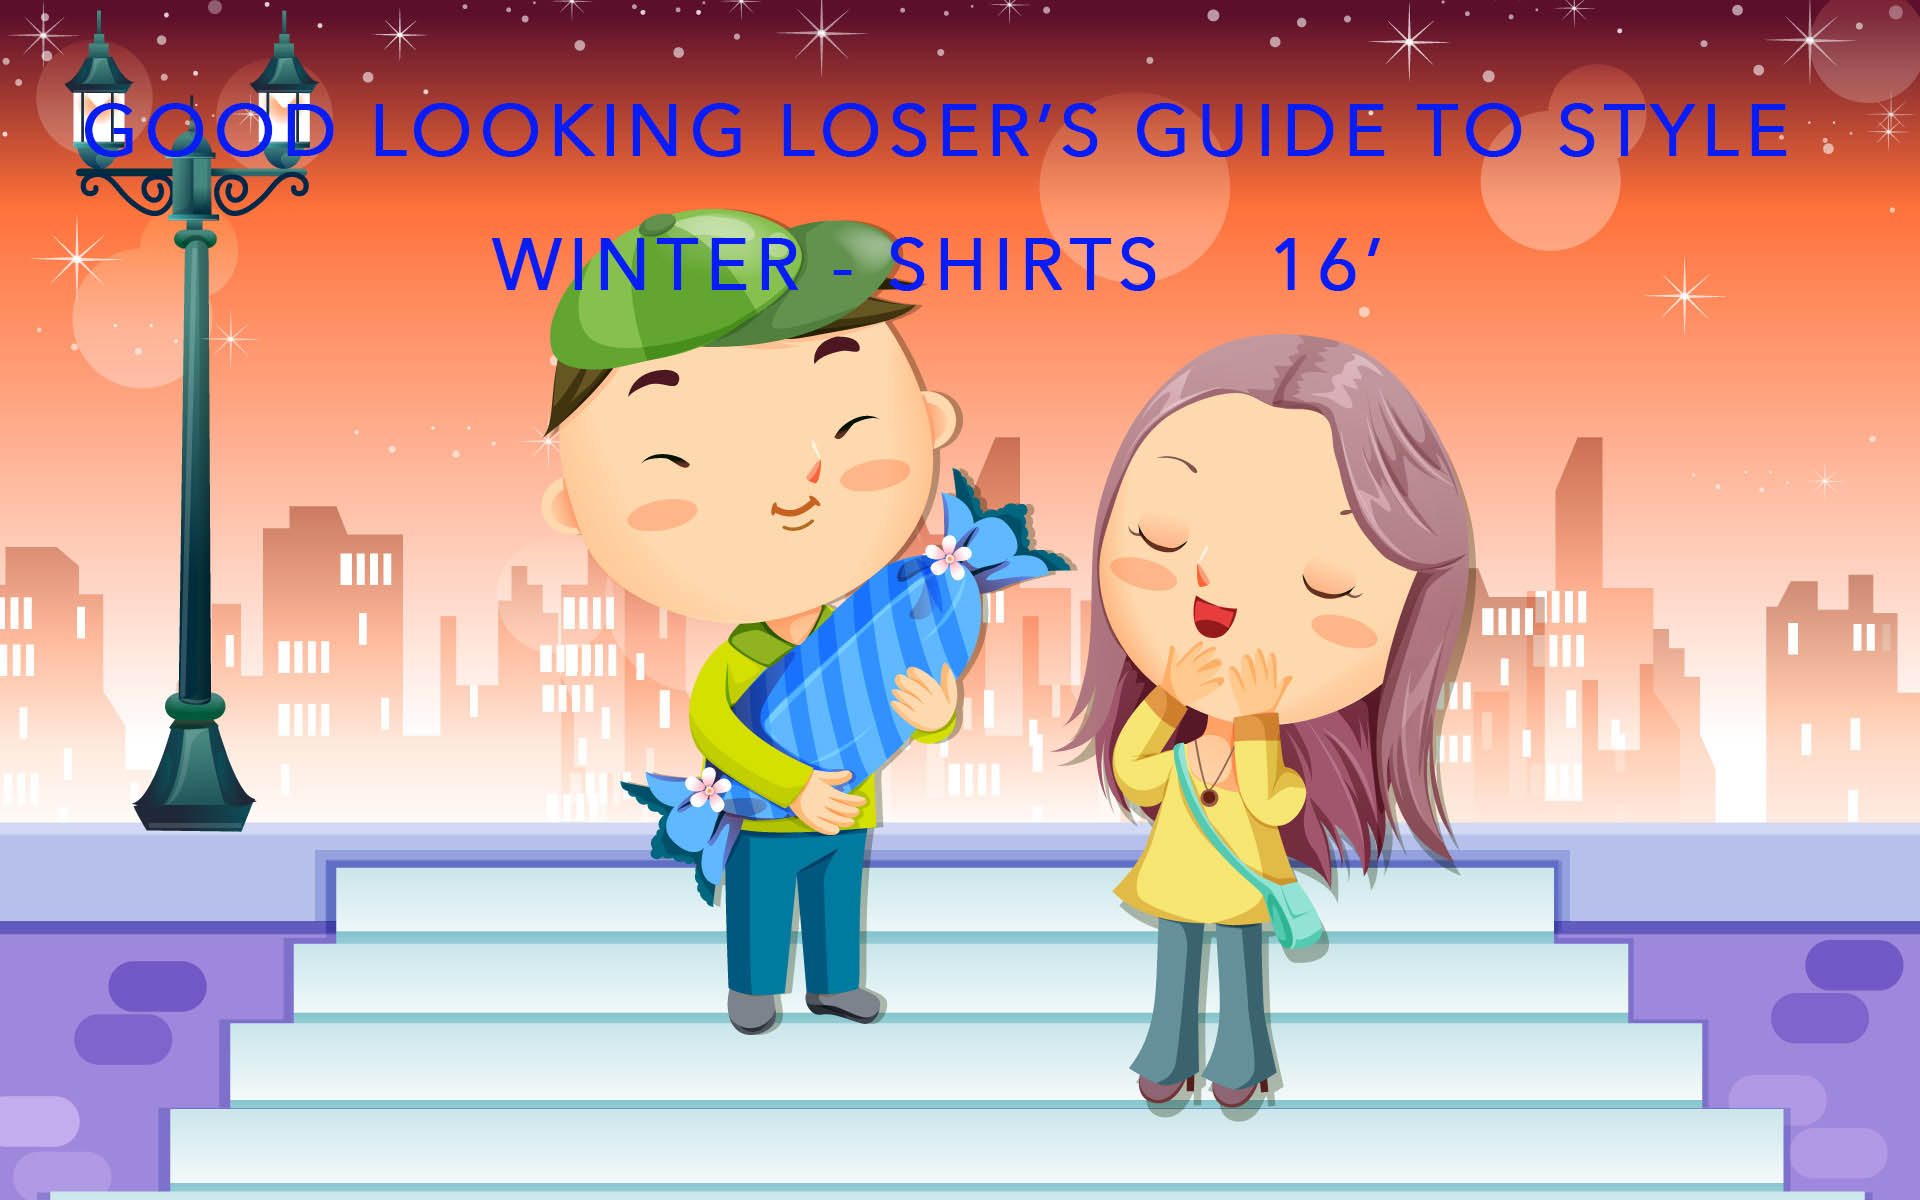 Good Looking Loser's Winter 2016 Guide to Style (Shirts)